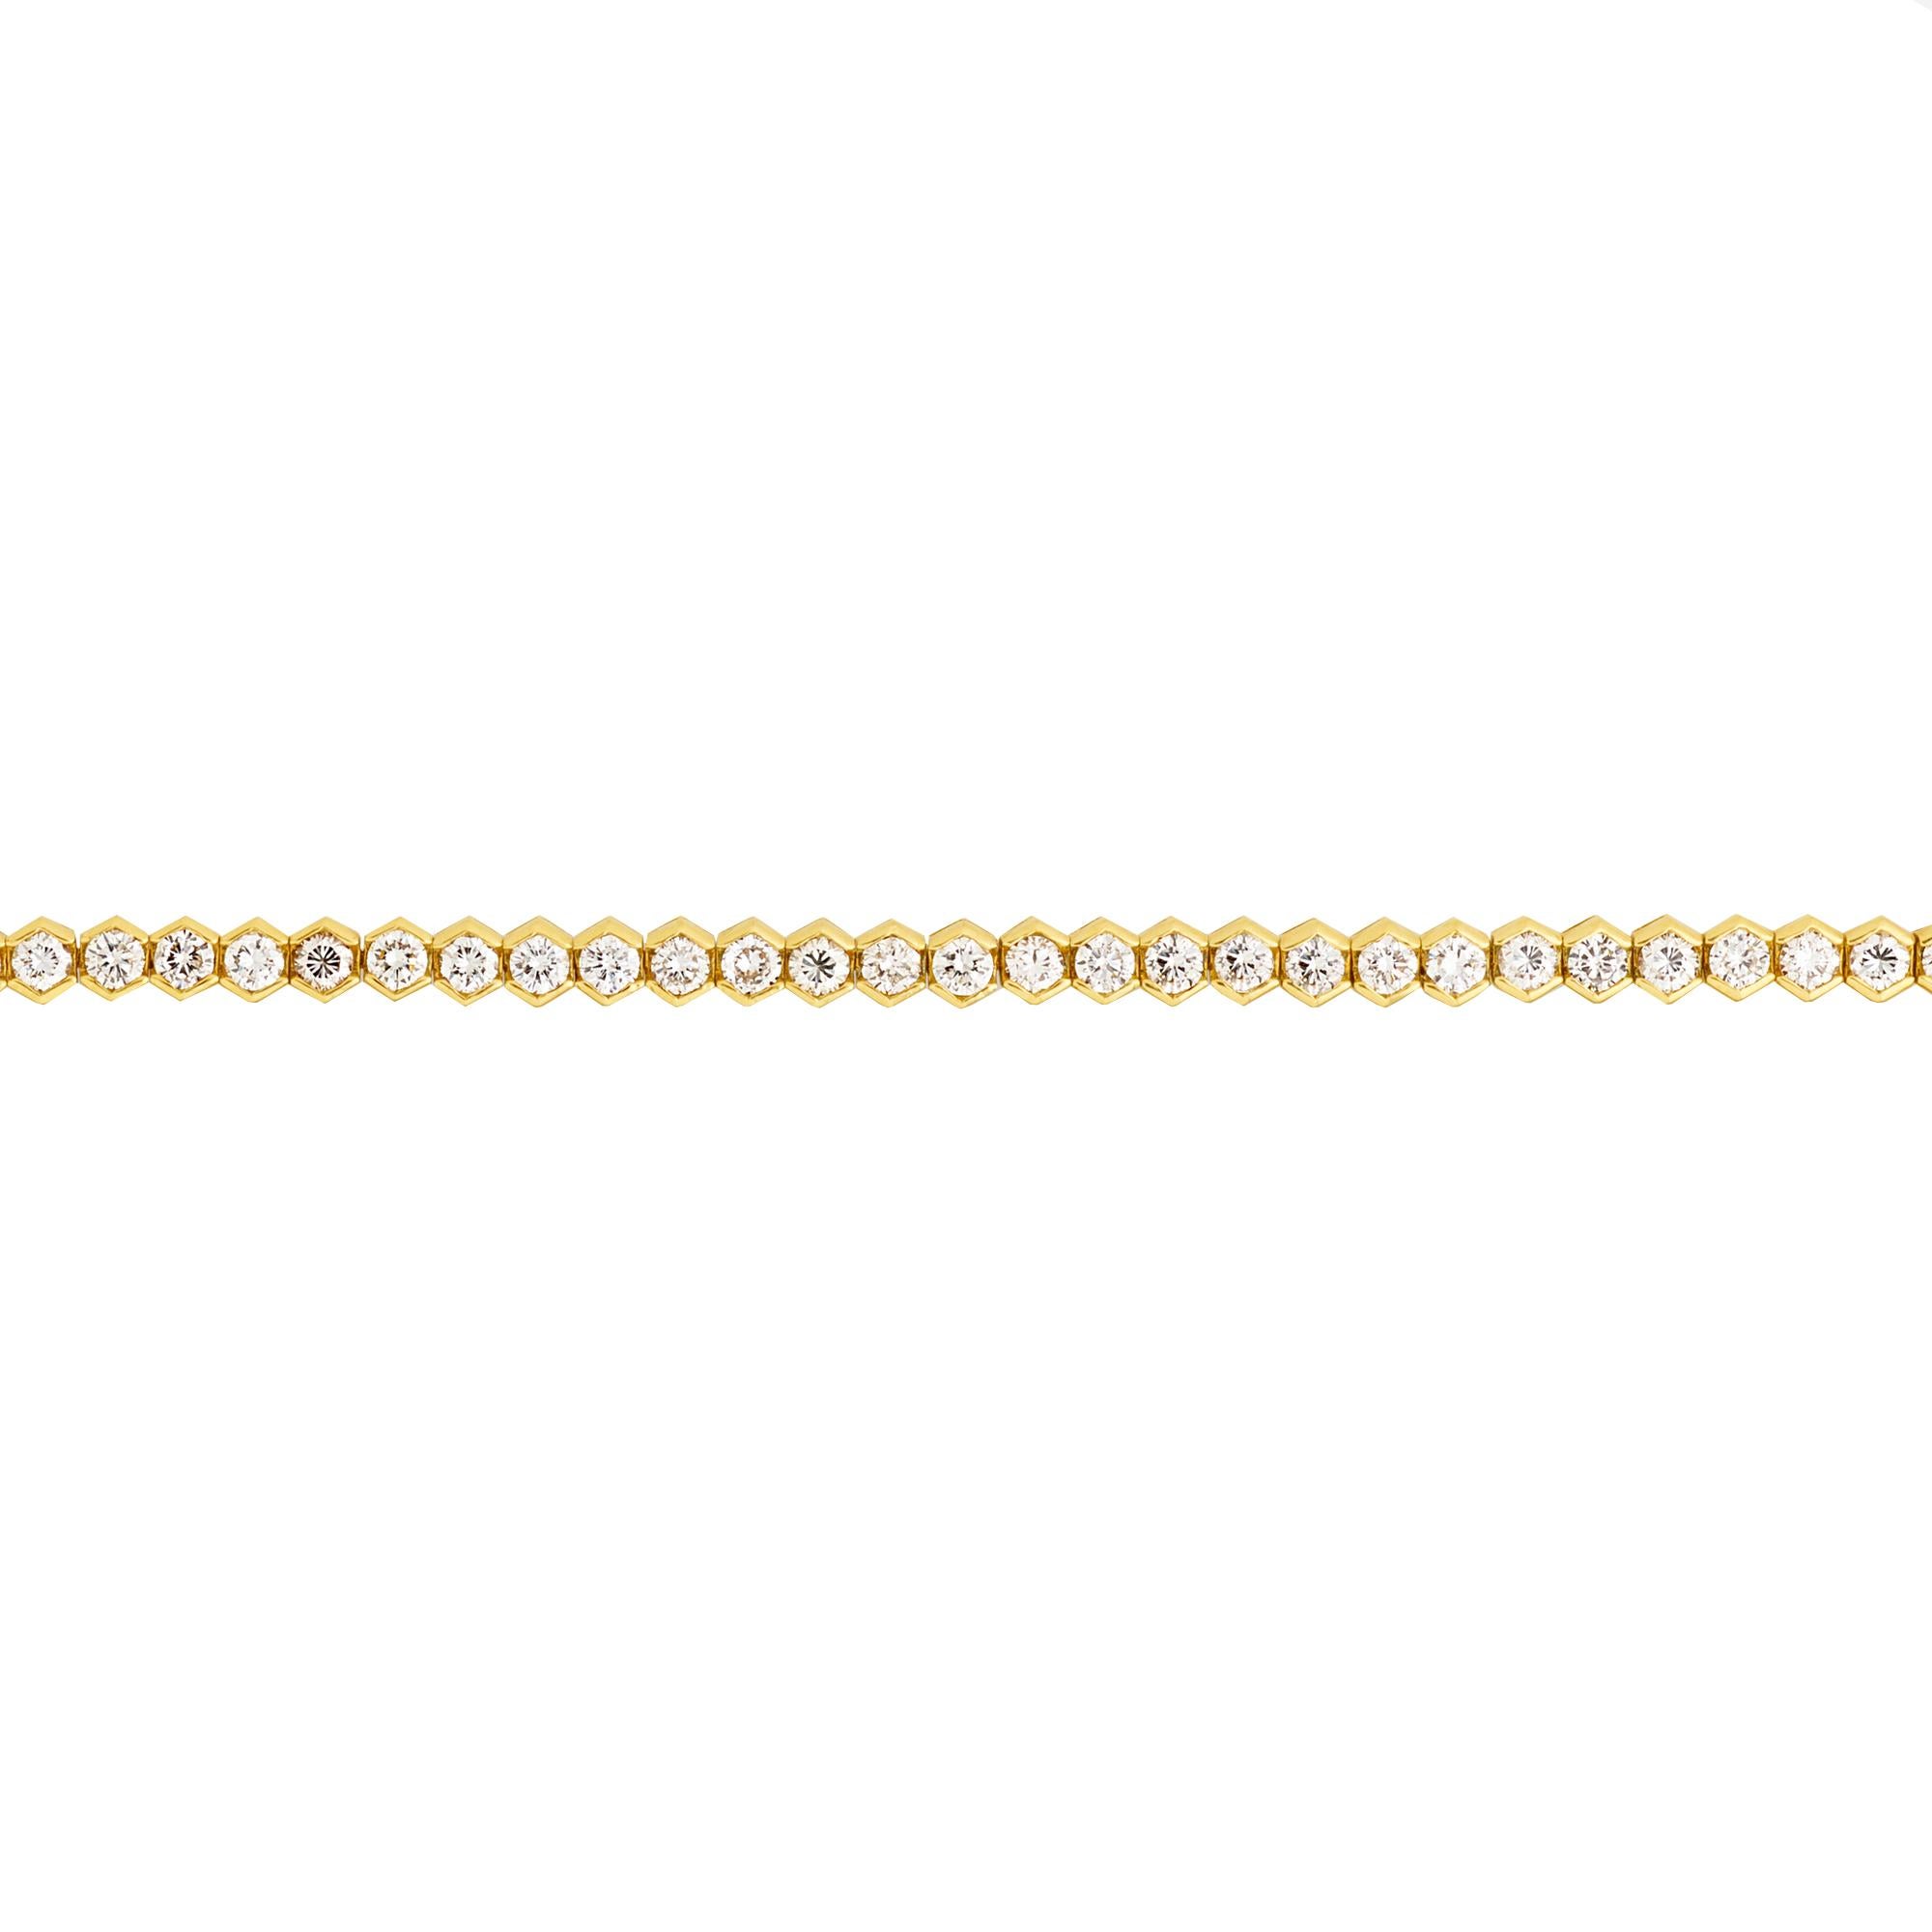 Of hexagonal polished gold links, each set with a round brilliant-cut diamond
18k yellow gold
7 ¼ ins; Gross weight 14.3g 9.19 dwts